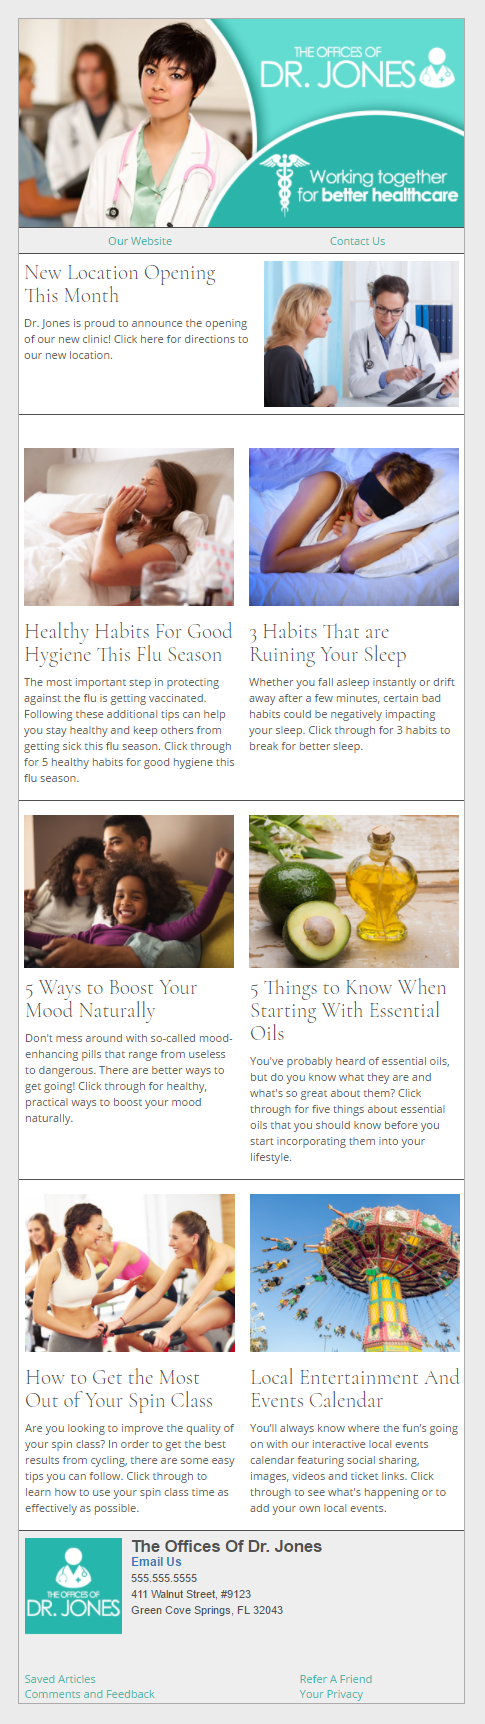 The Offices Of Dr. Jones health and wellness Email Newsletter Preview